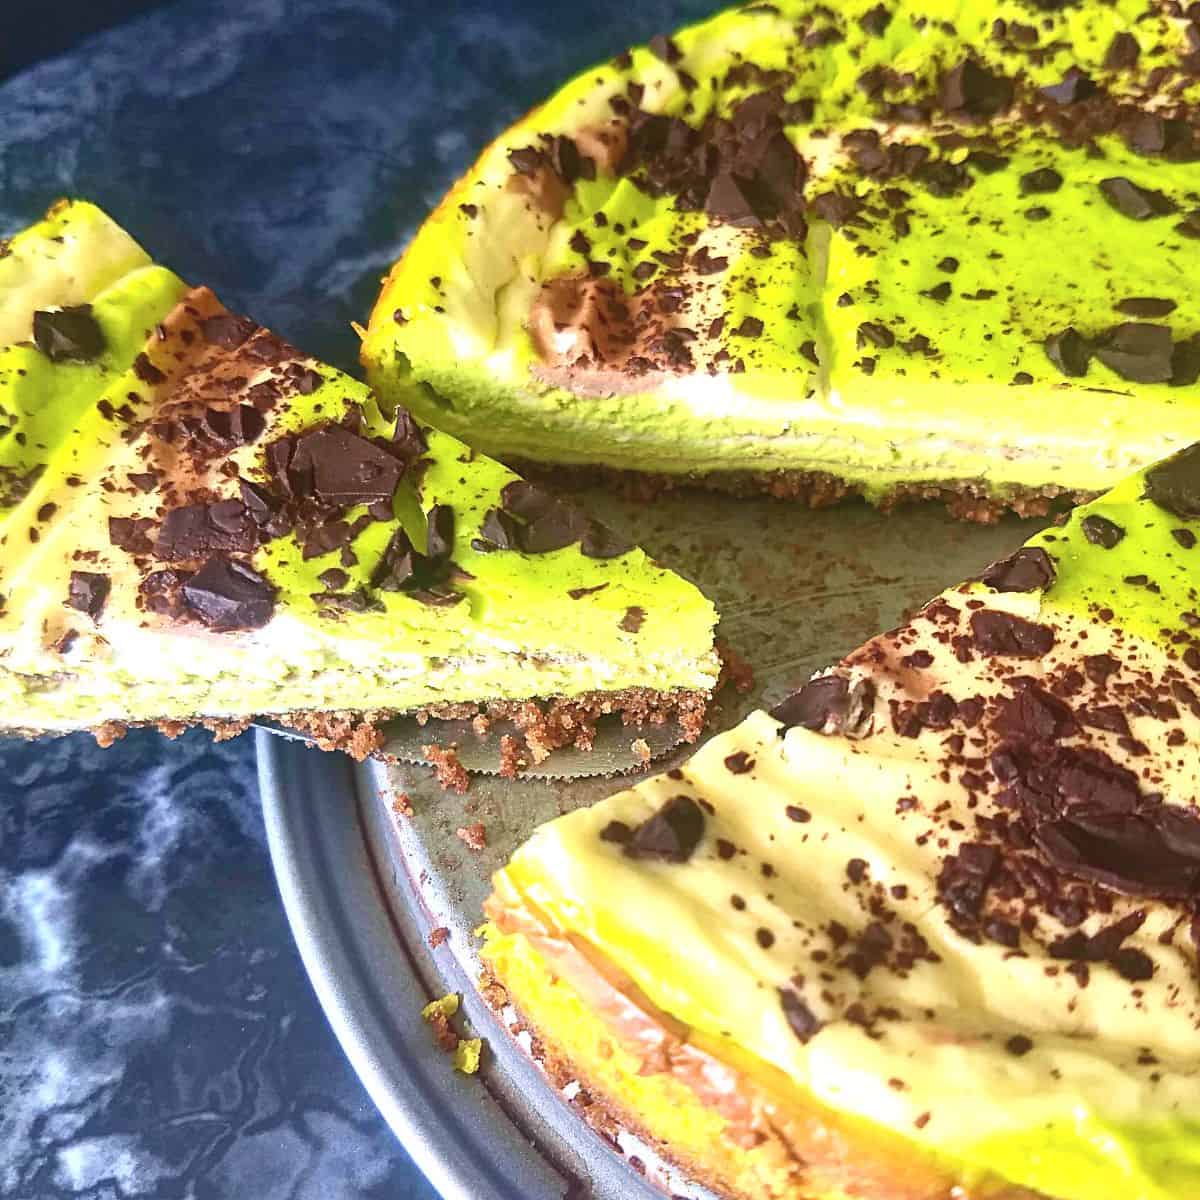 Mint Chocolate Cheesecake - 21Keto and Low-Carb Desserts Without Erythritol